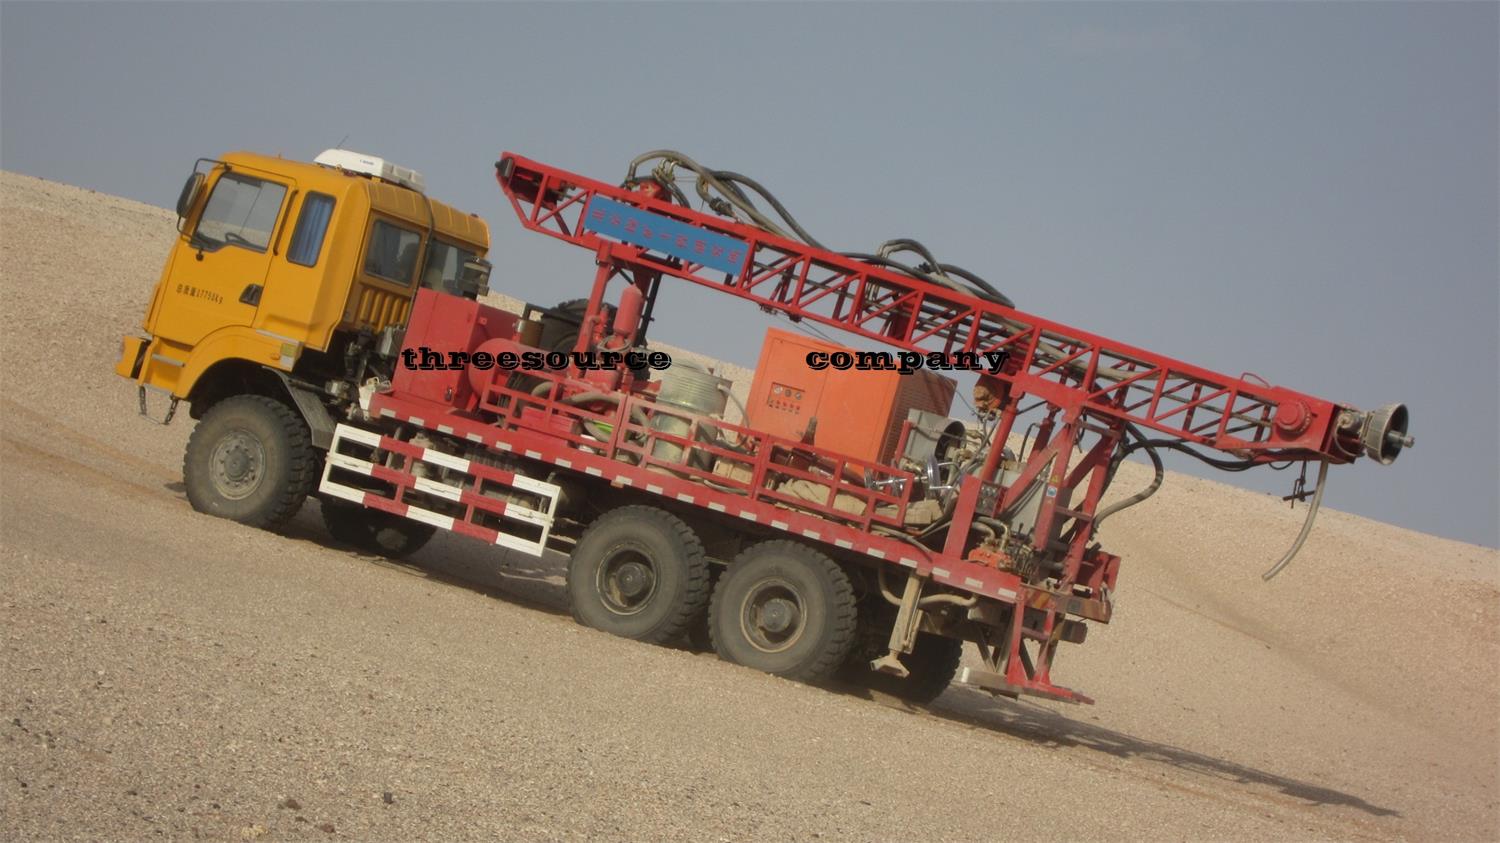 Truck mounted drilling rig for oil prospecting